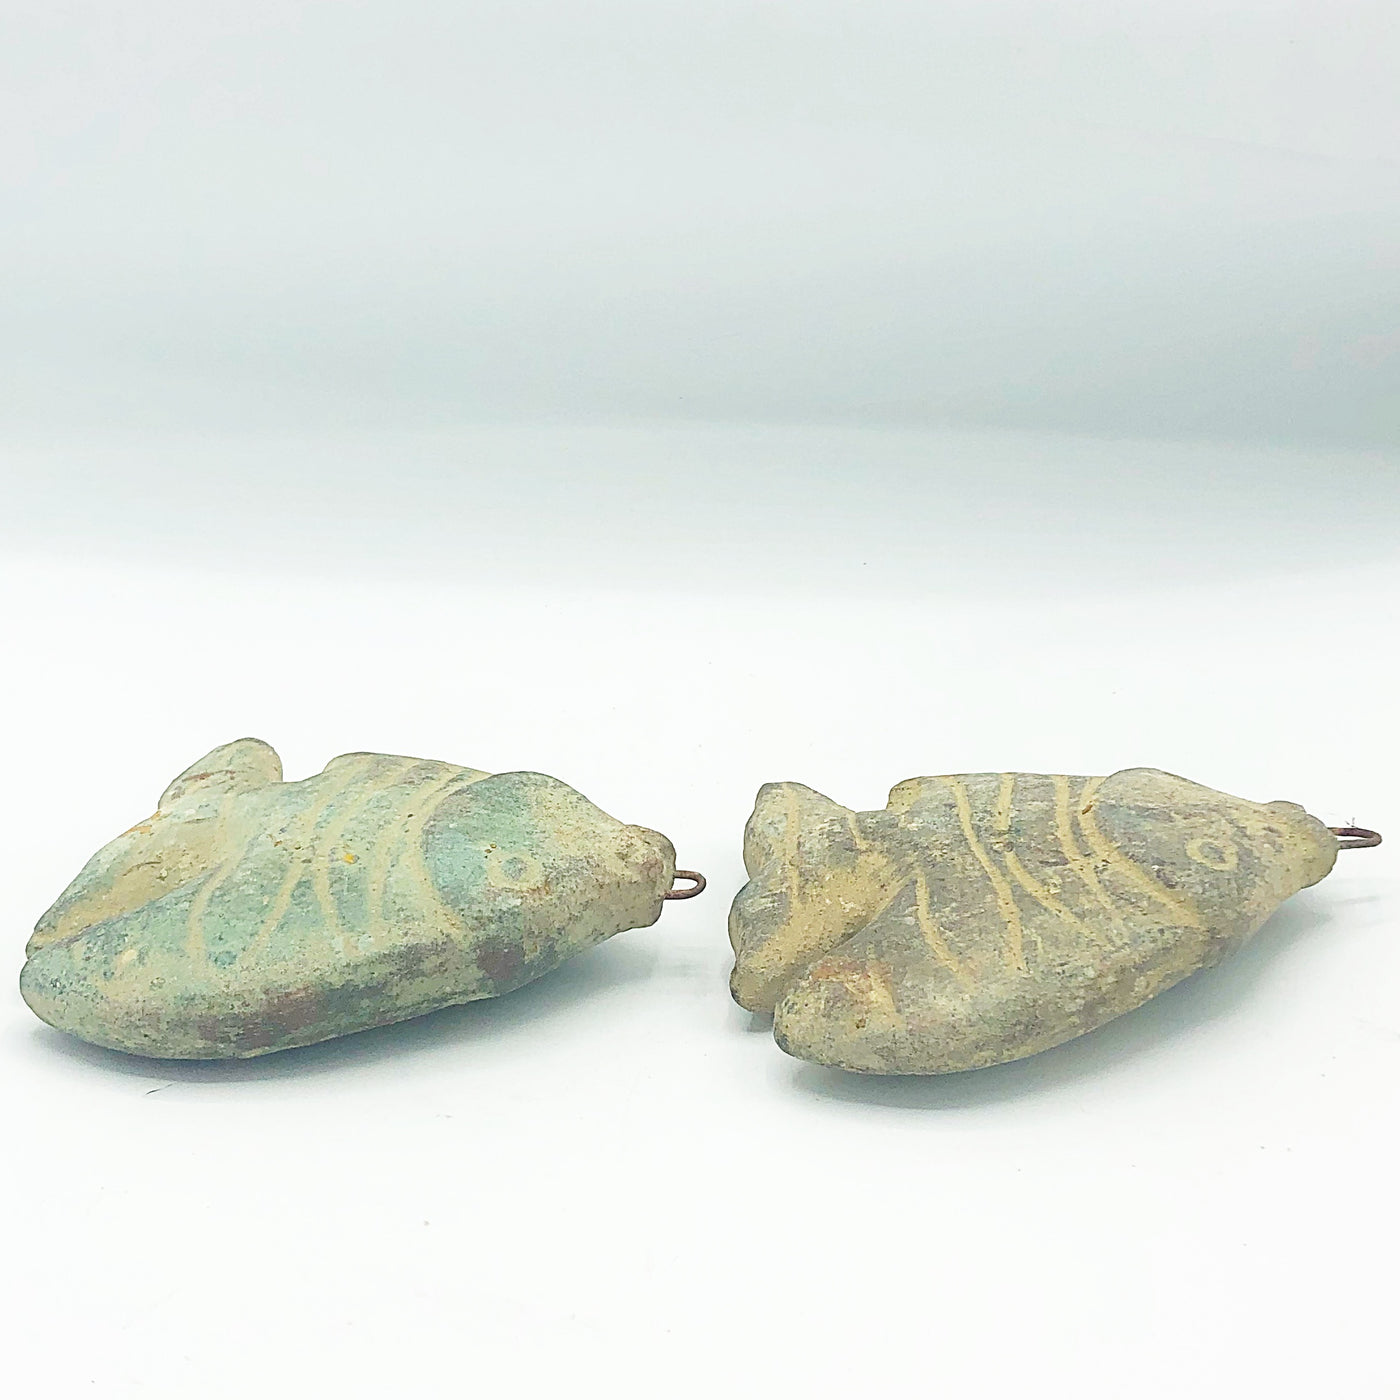 💙 Set of 2 Distressed Fish Pottery Figurines